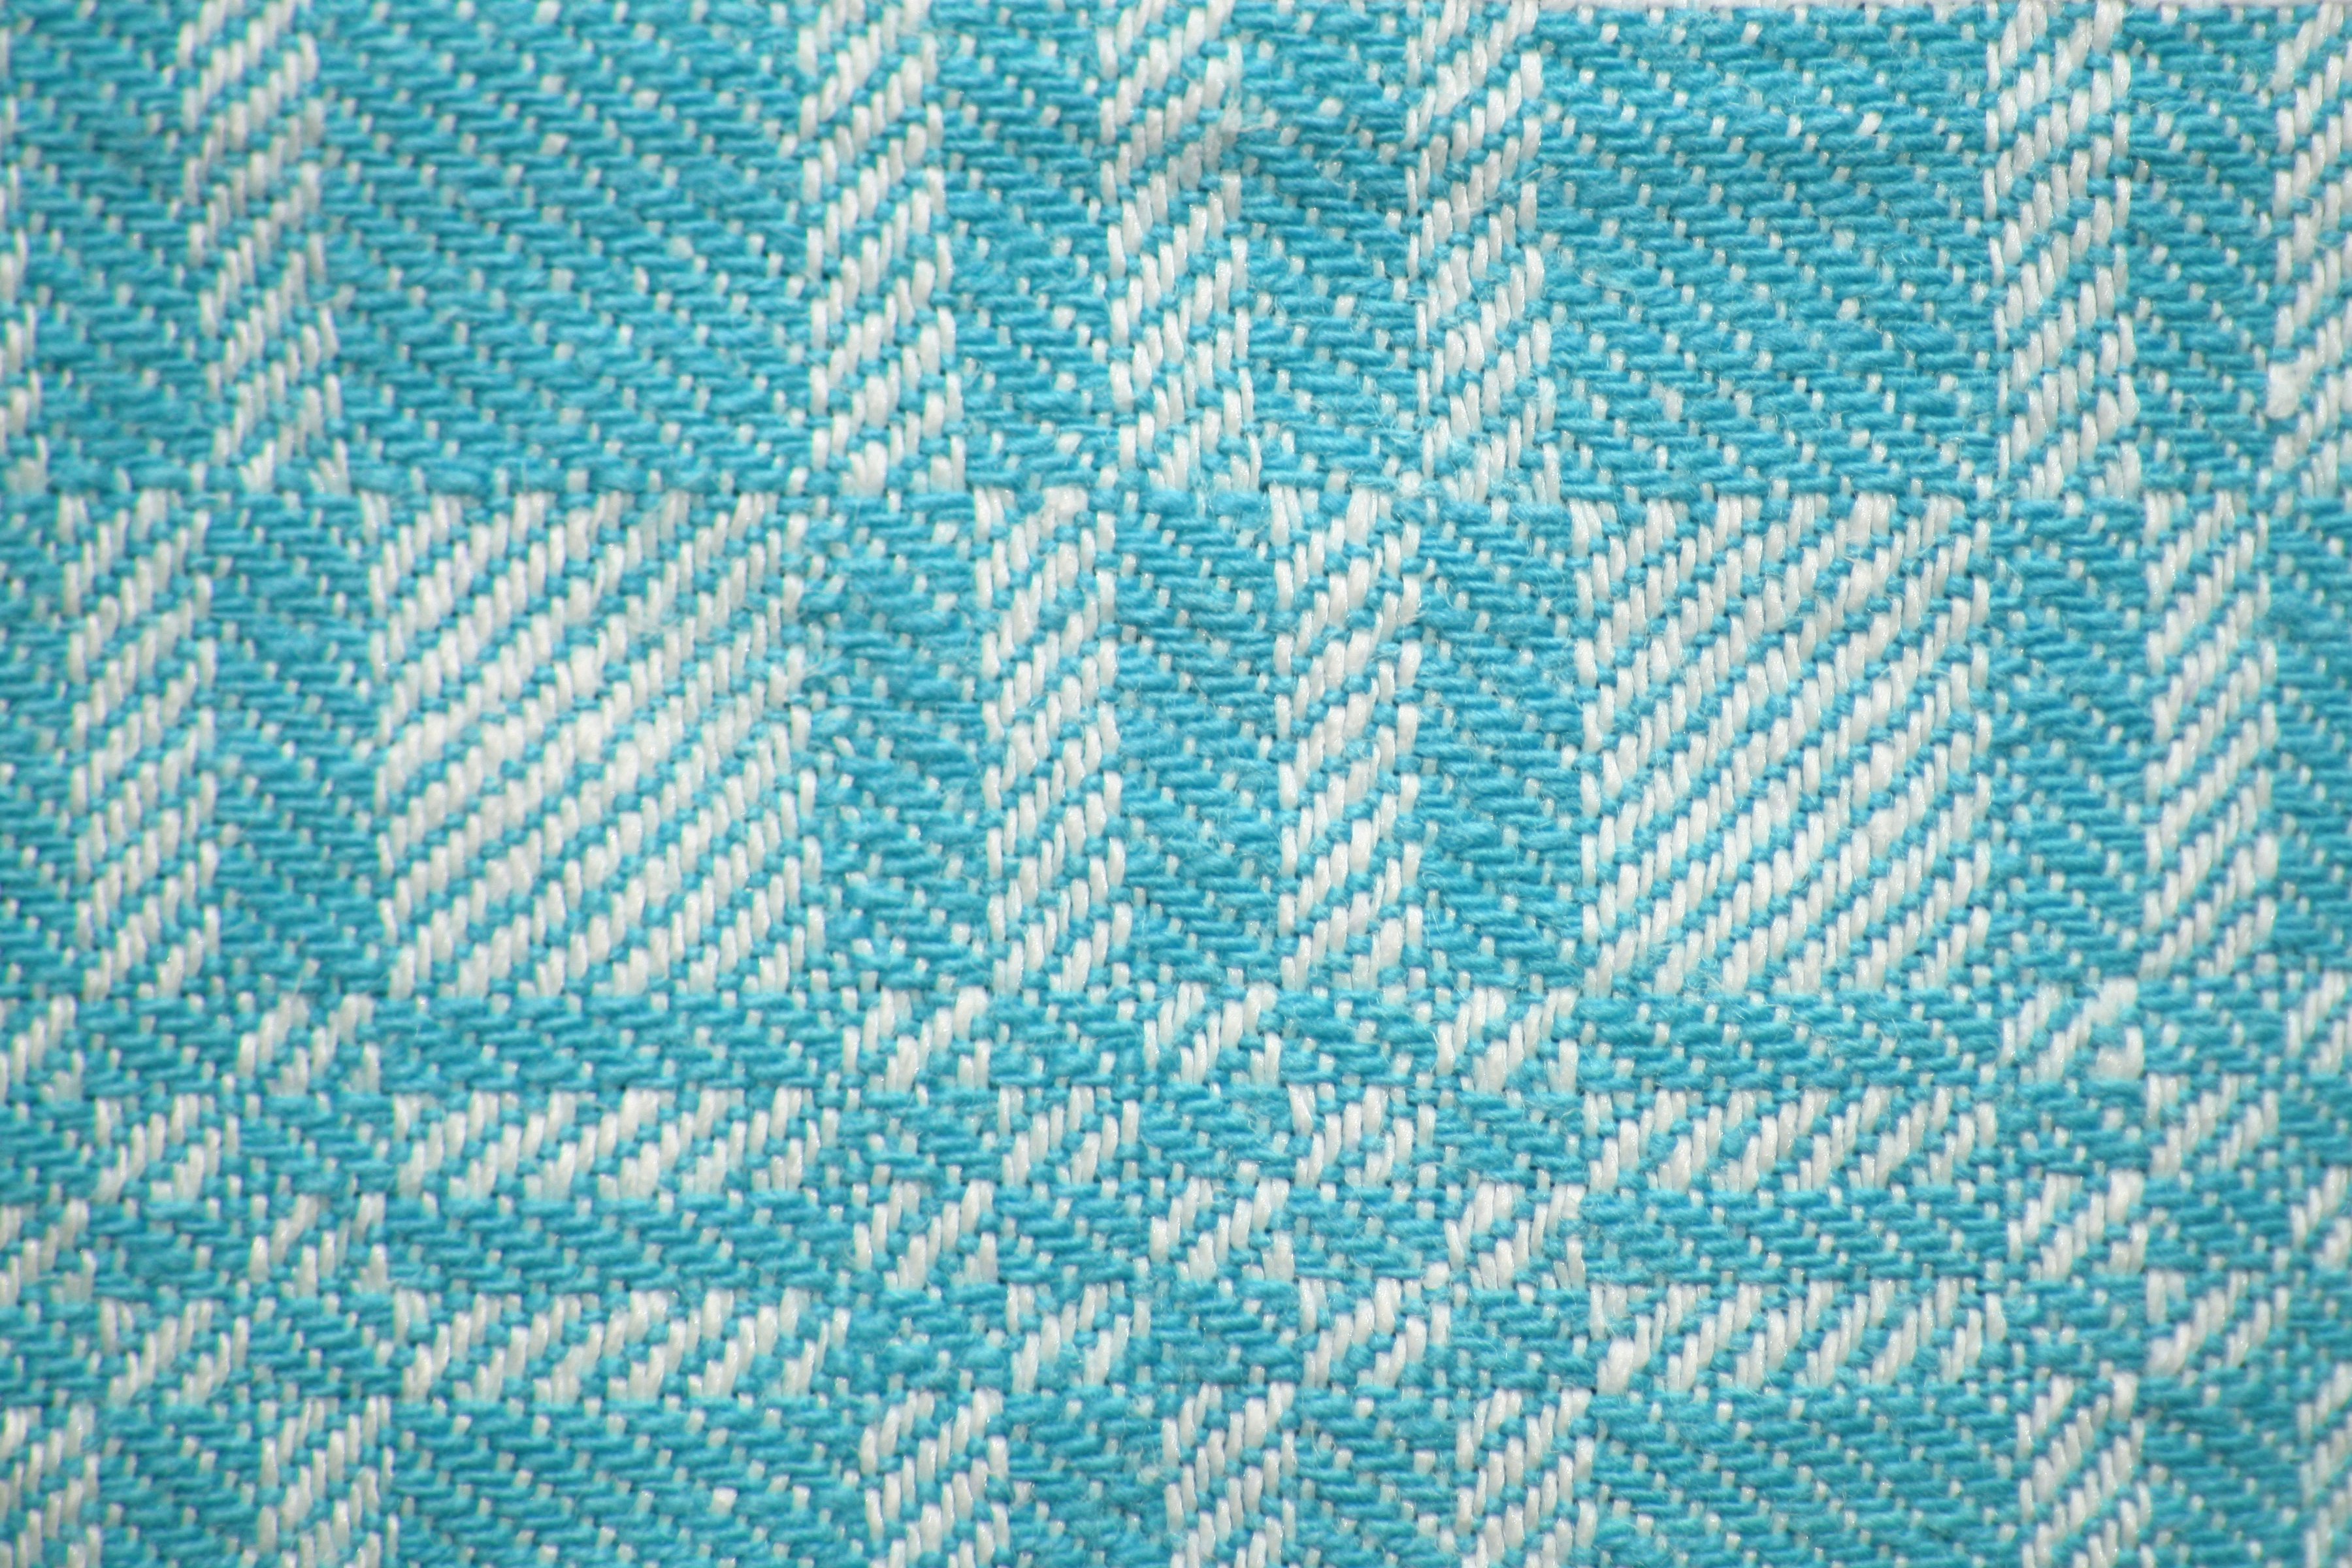 Teal and White Woven Fabric Texture with Squares Pattern Picture | Free ...